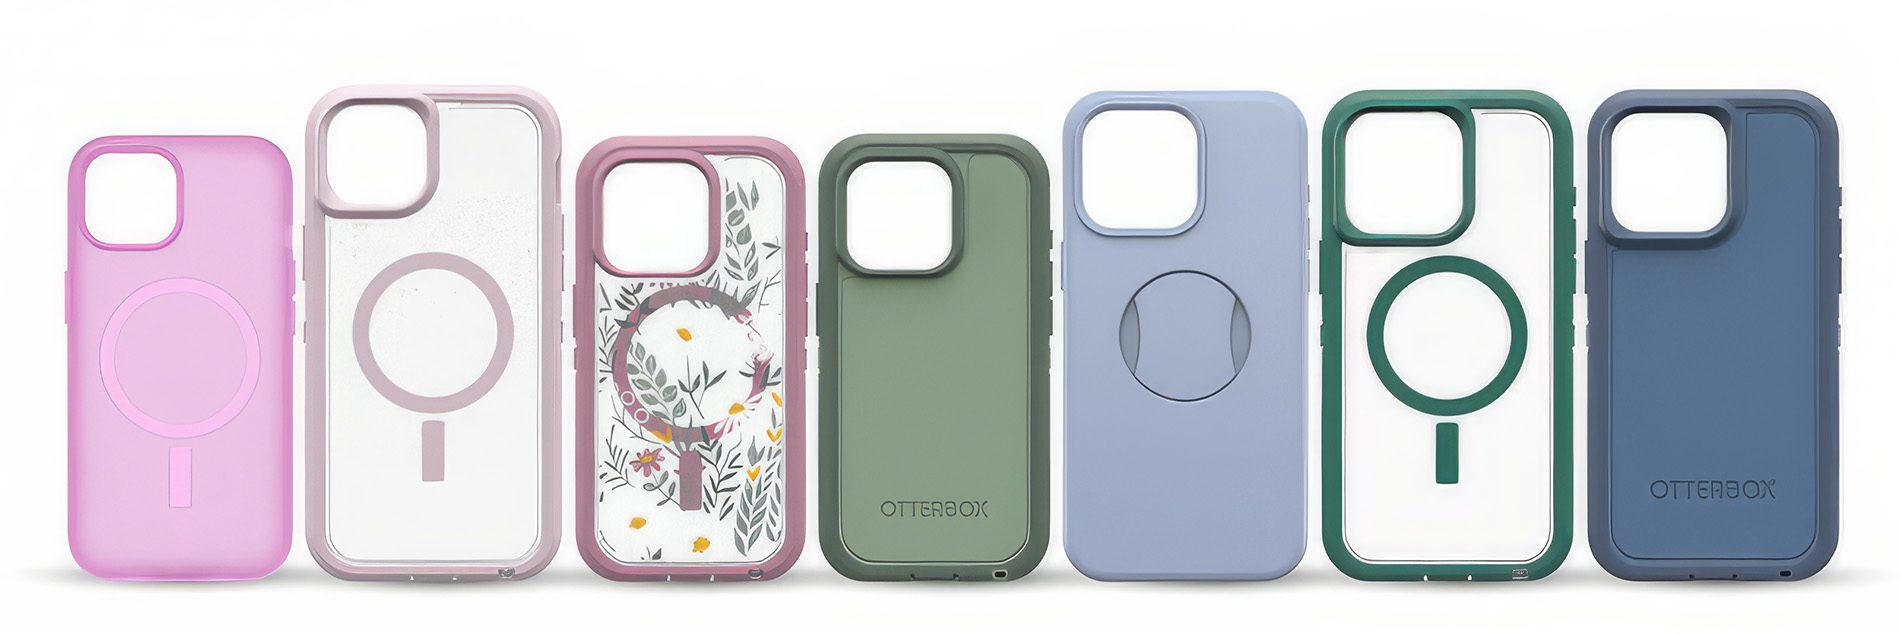 otterbox-iphone-cases